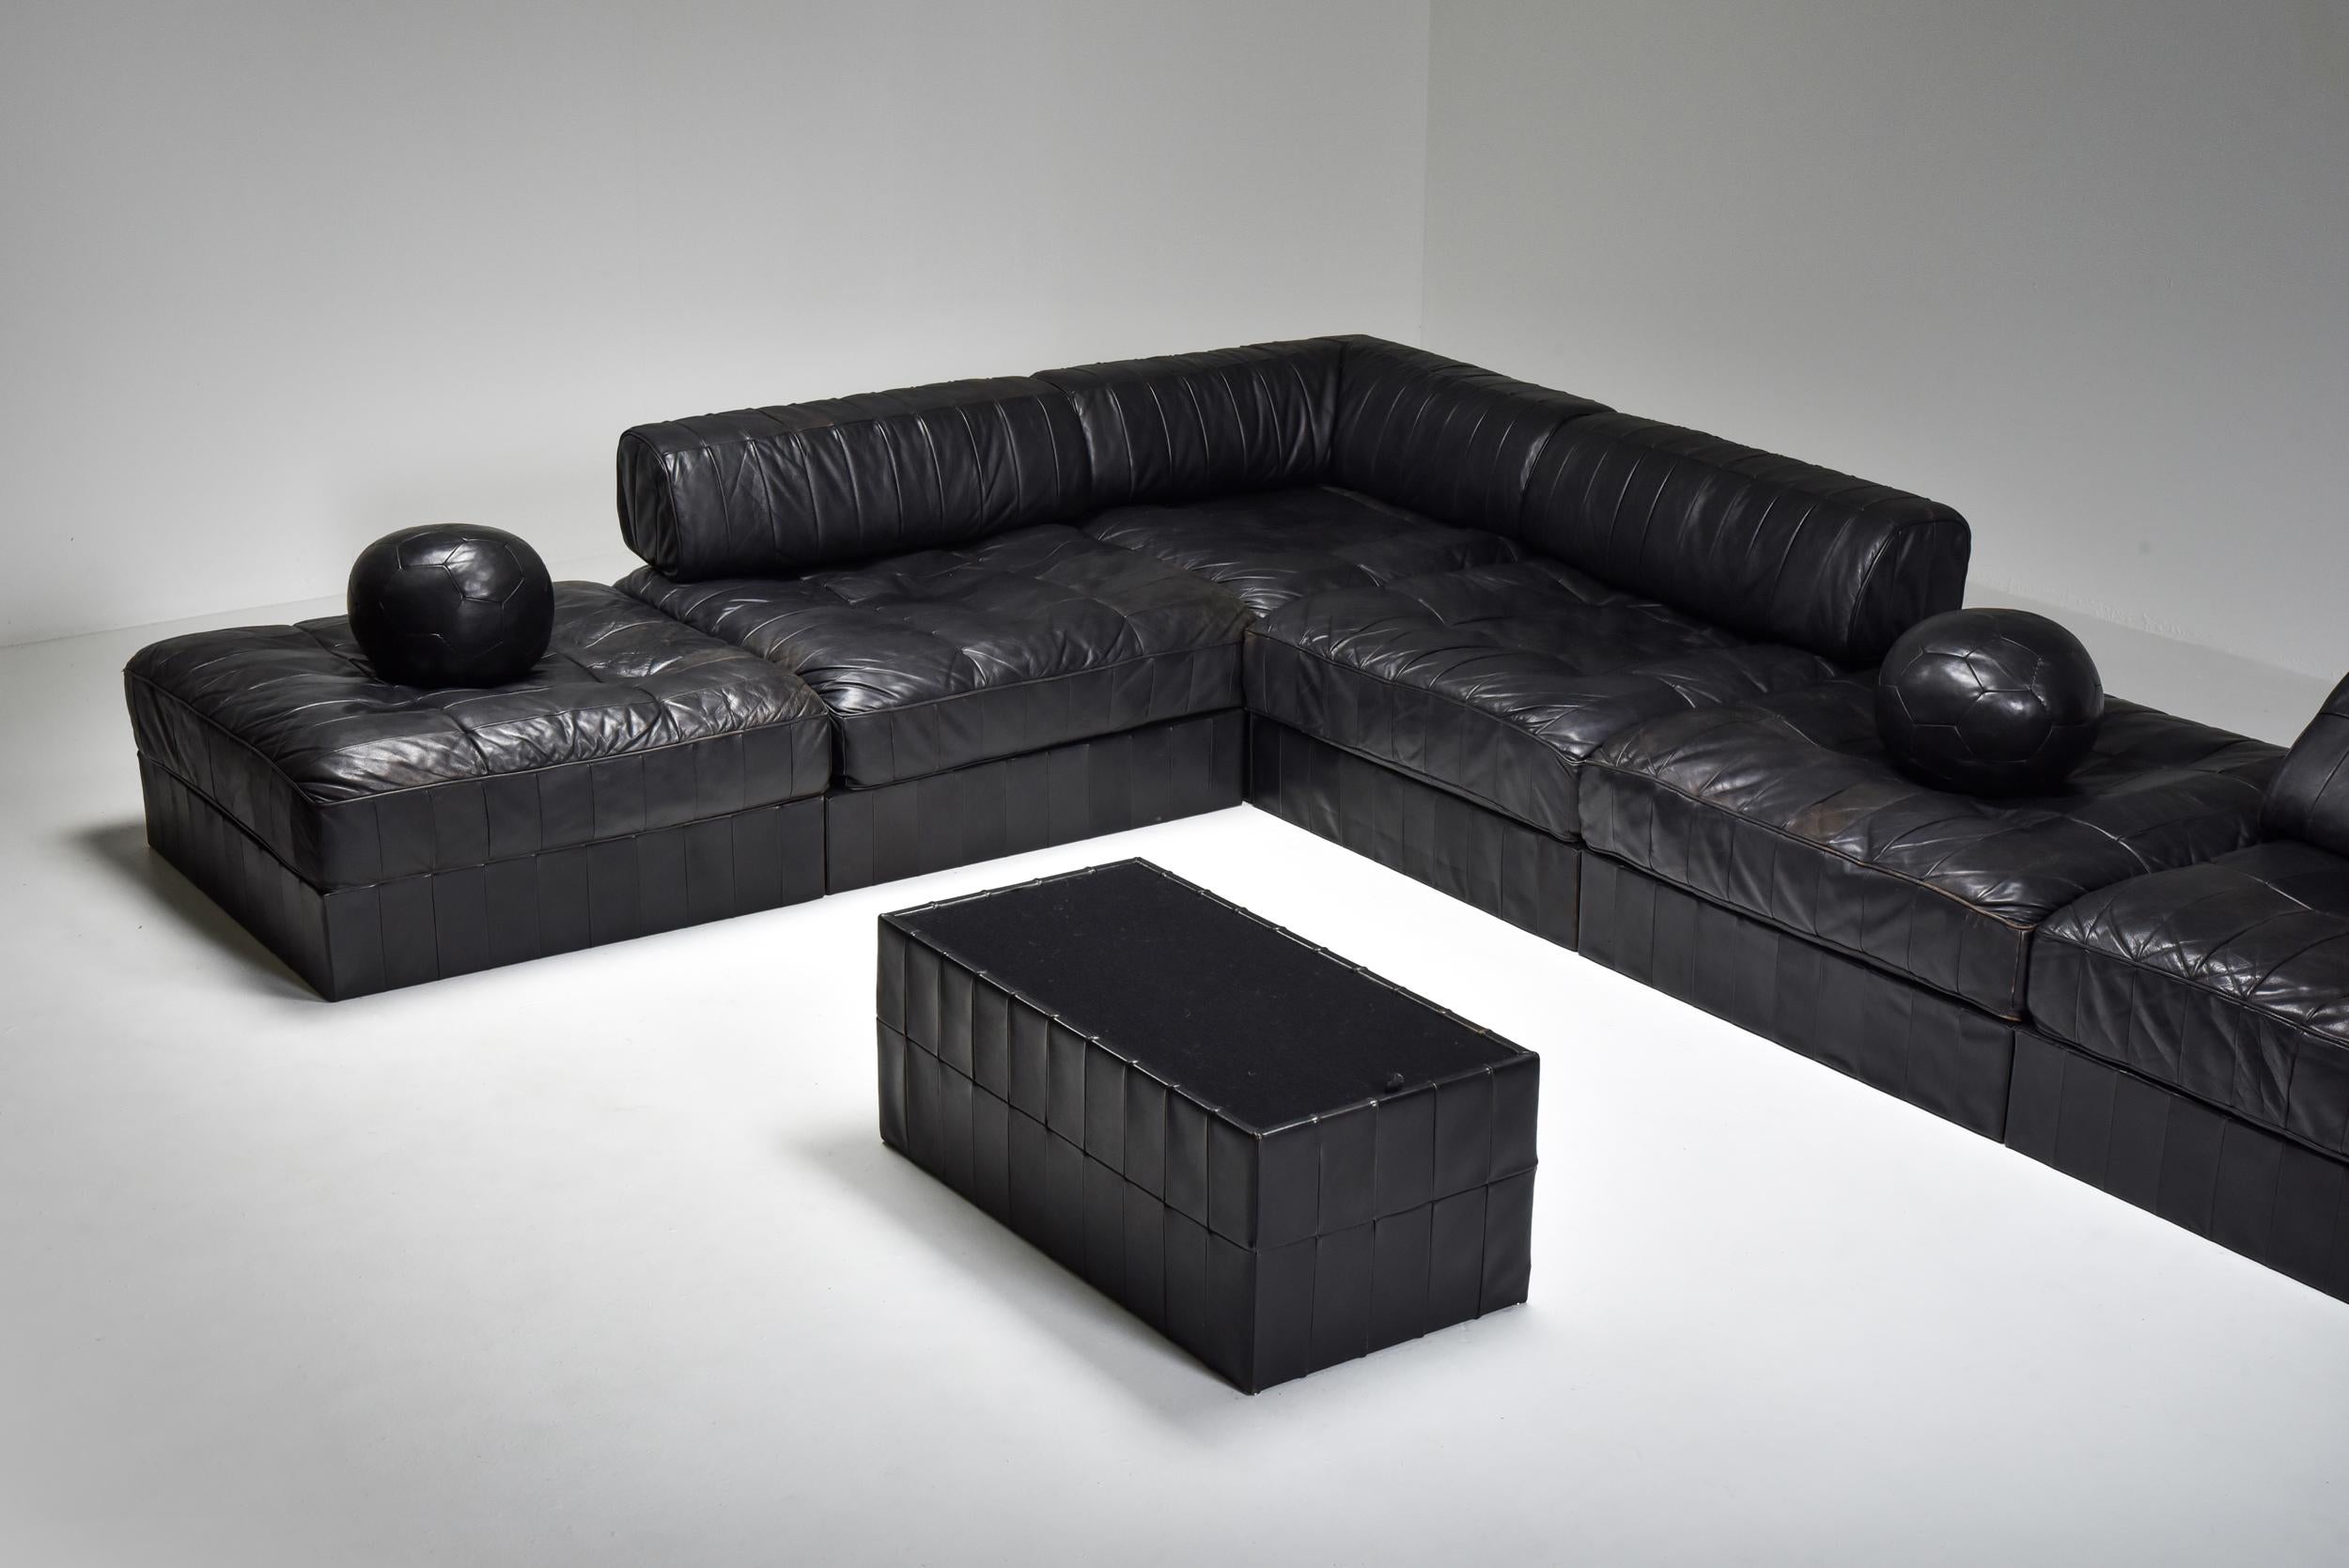 Swiss Mid-Century Modern De Sede Modular and Sectional Patchwork Sofa in Black Leather